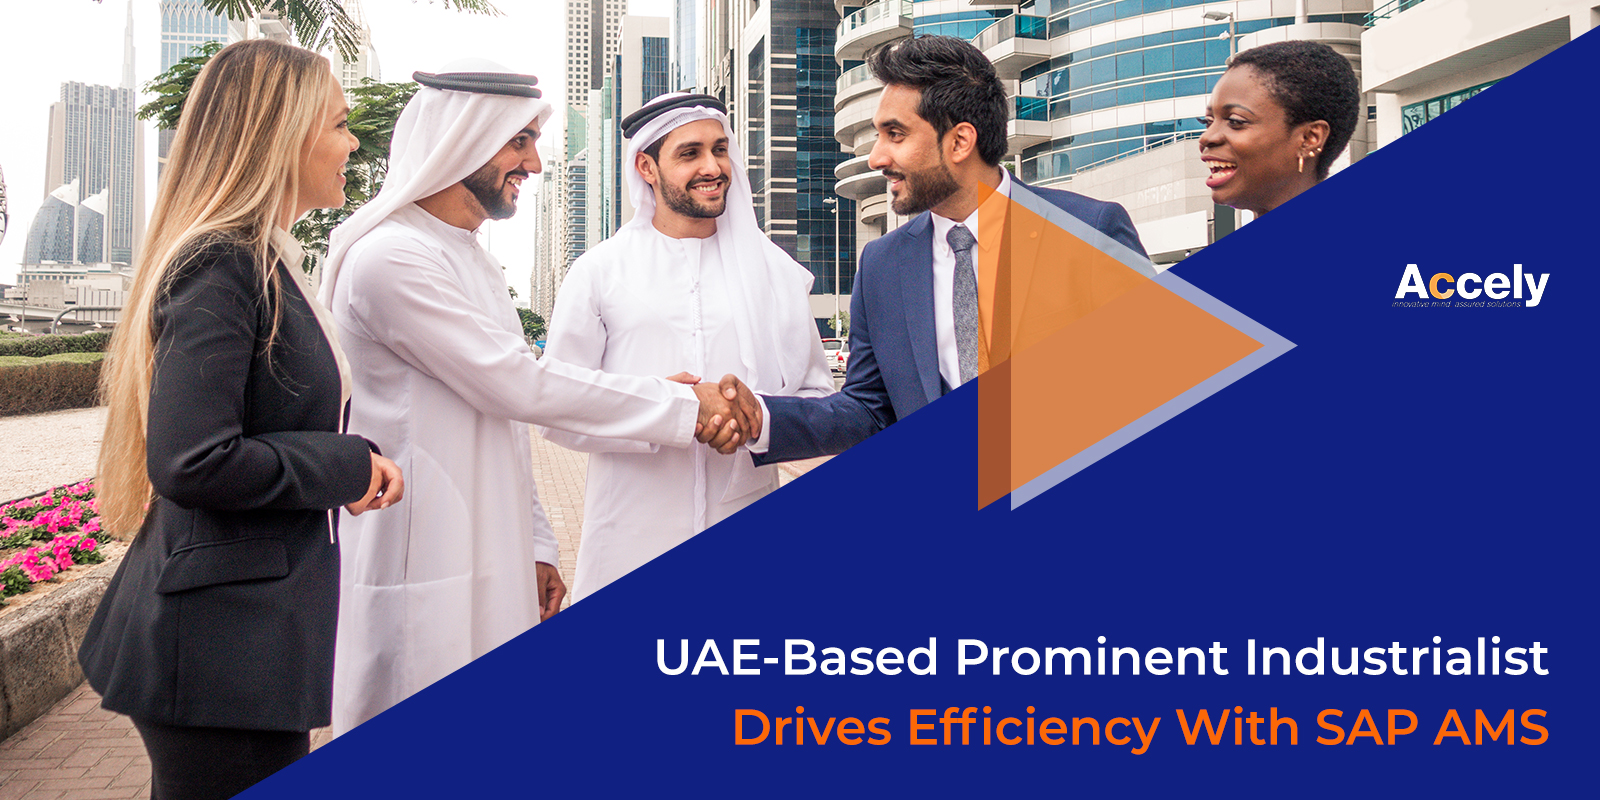 UAE-Based Prominent Industrialist Drives Efficiency With SAP AMS